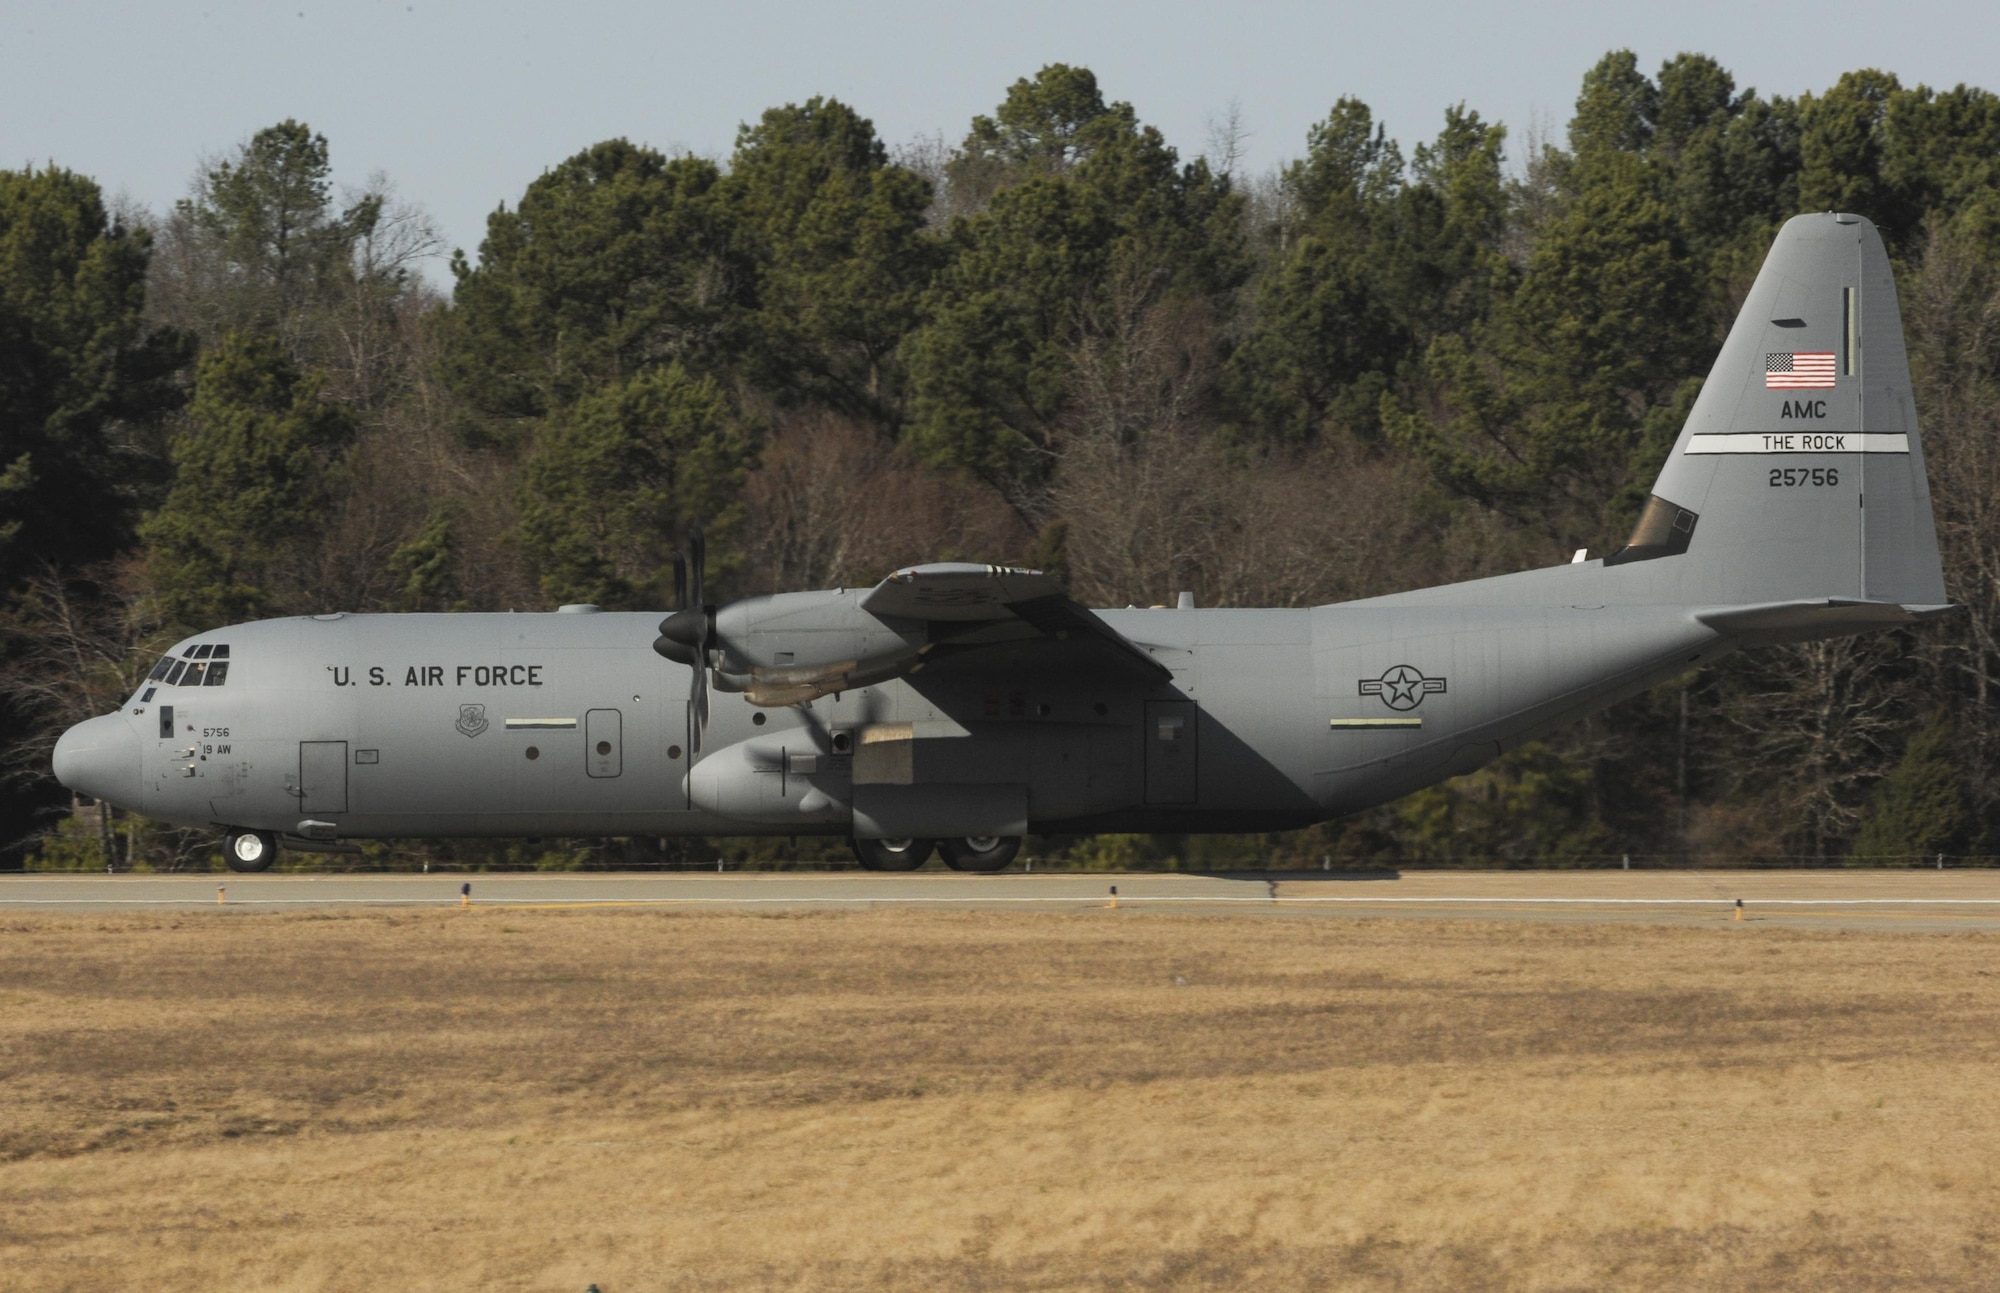 The 913 Airlift Group is transitioning from the C-130H to C-130J. The C-130J is the latest addition to the C-130 fleet and incorporates state-of-the-art technology, which reduces manpower requirements, lowers operating and support costs, and provides life-cycle cost savings over earlier C-130 models. Compared to older C-130s, the J model climbs faster and higher, flies farther at a higher cruise speed, and takes off and lands in a shorter distance. The C-130J-30 is a stretch version, adding 15 feet to the fuselage, increasing usable space in the cargo compartment. (U.S. Air Force photo by Senior Airman Scott Poe)